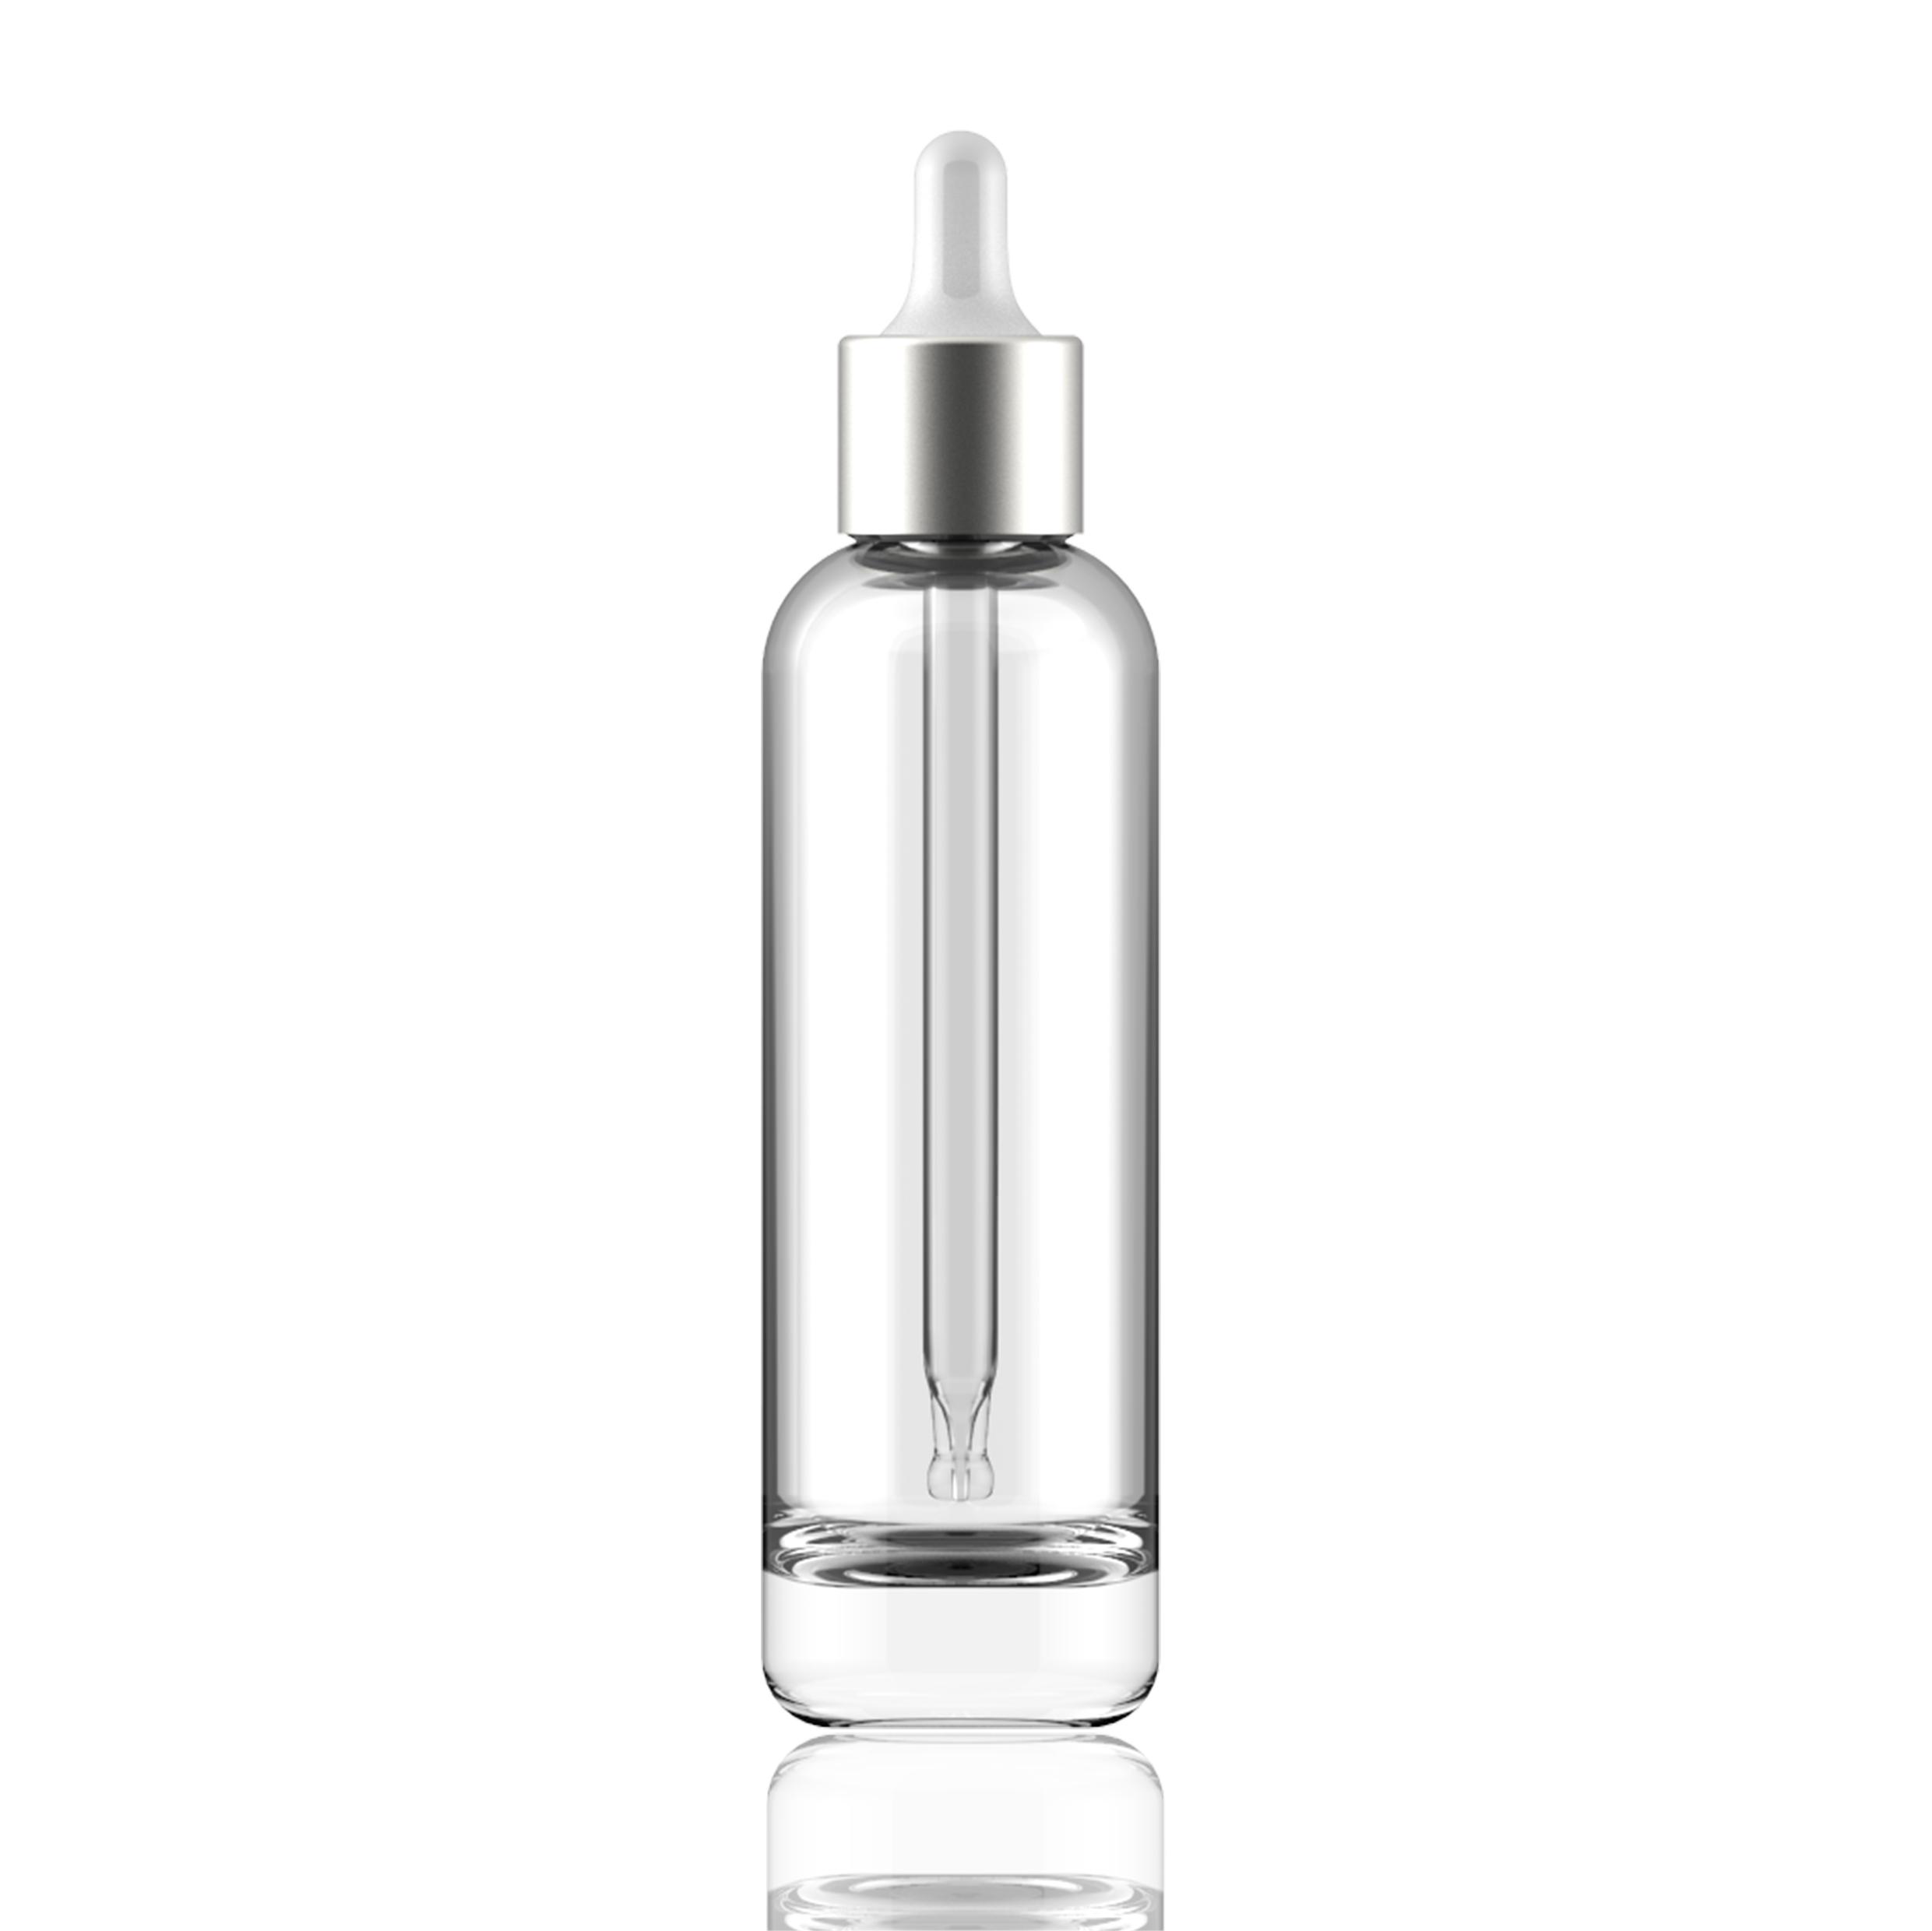 35ml Thick Base Glass Vial with Dropper Featured Image